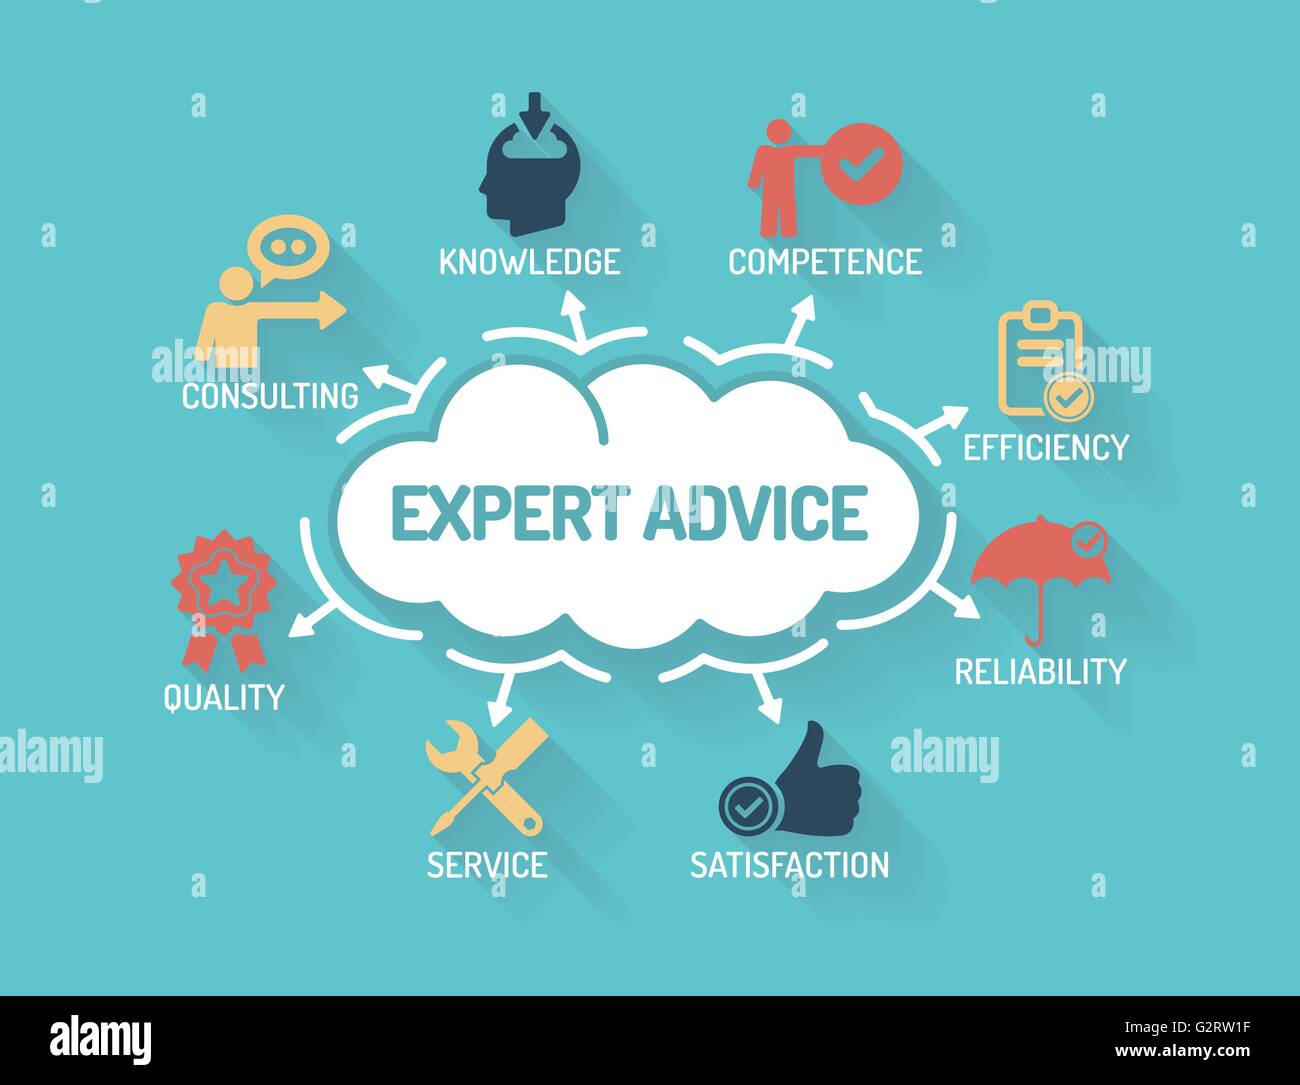 Expert Advice - Chart with keywords and icons - Flat Design Stock Vector